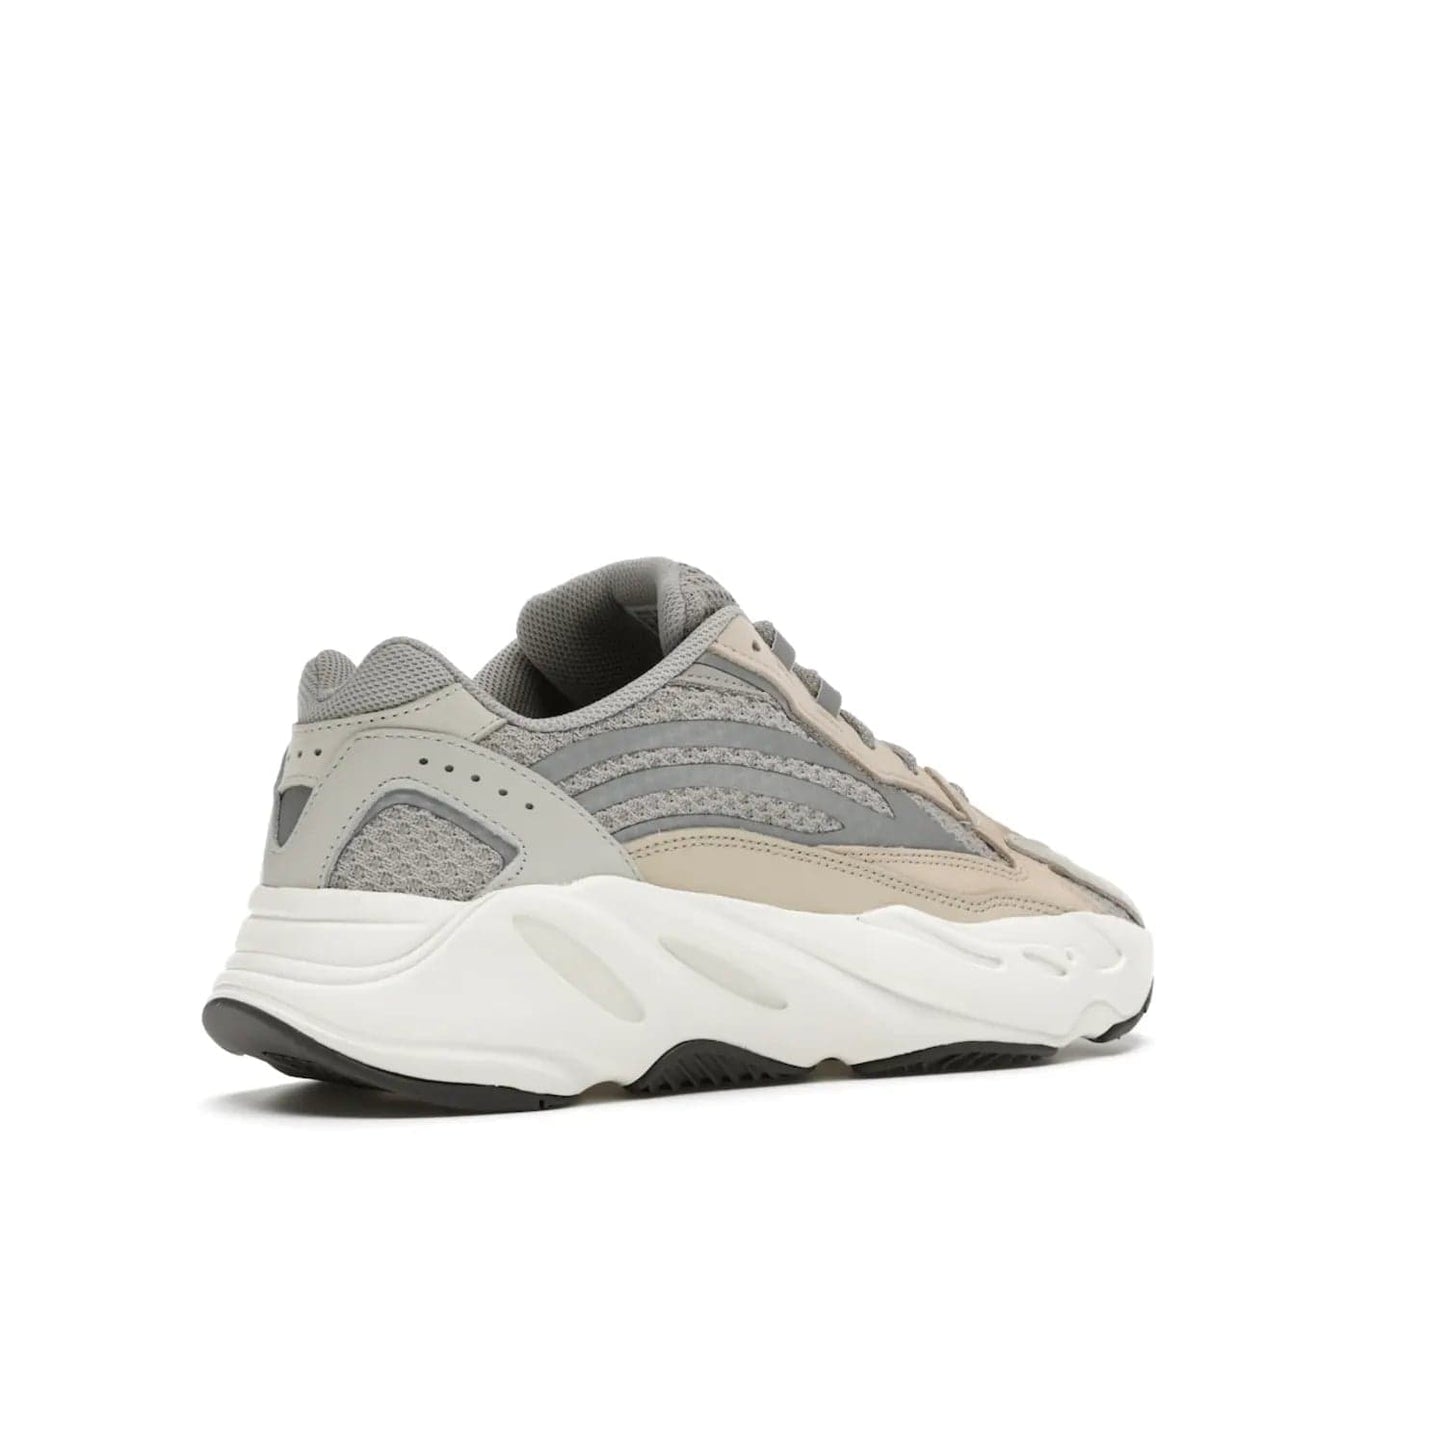 adidas Yeezy Boost 700 V2 Cream - Image 33 - Only at www.BallersClubKickz.com - Add style and luxury to your wardrobe with the adidas Yeezy 700 V2 Cream. Featuring a unique reflective upper, leather overlays, mesh underlays and the signature BOOST midsole, this silhouette is perfect for any stylish wardrobe.